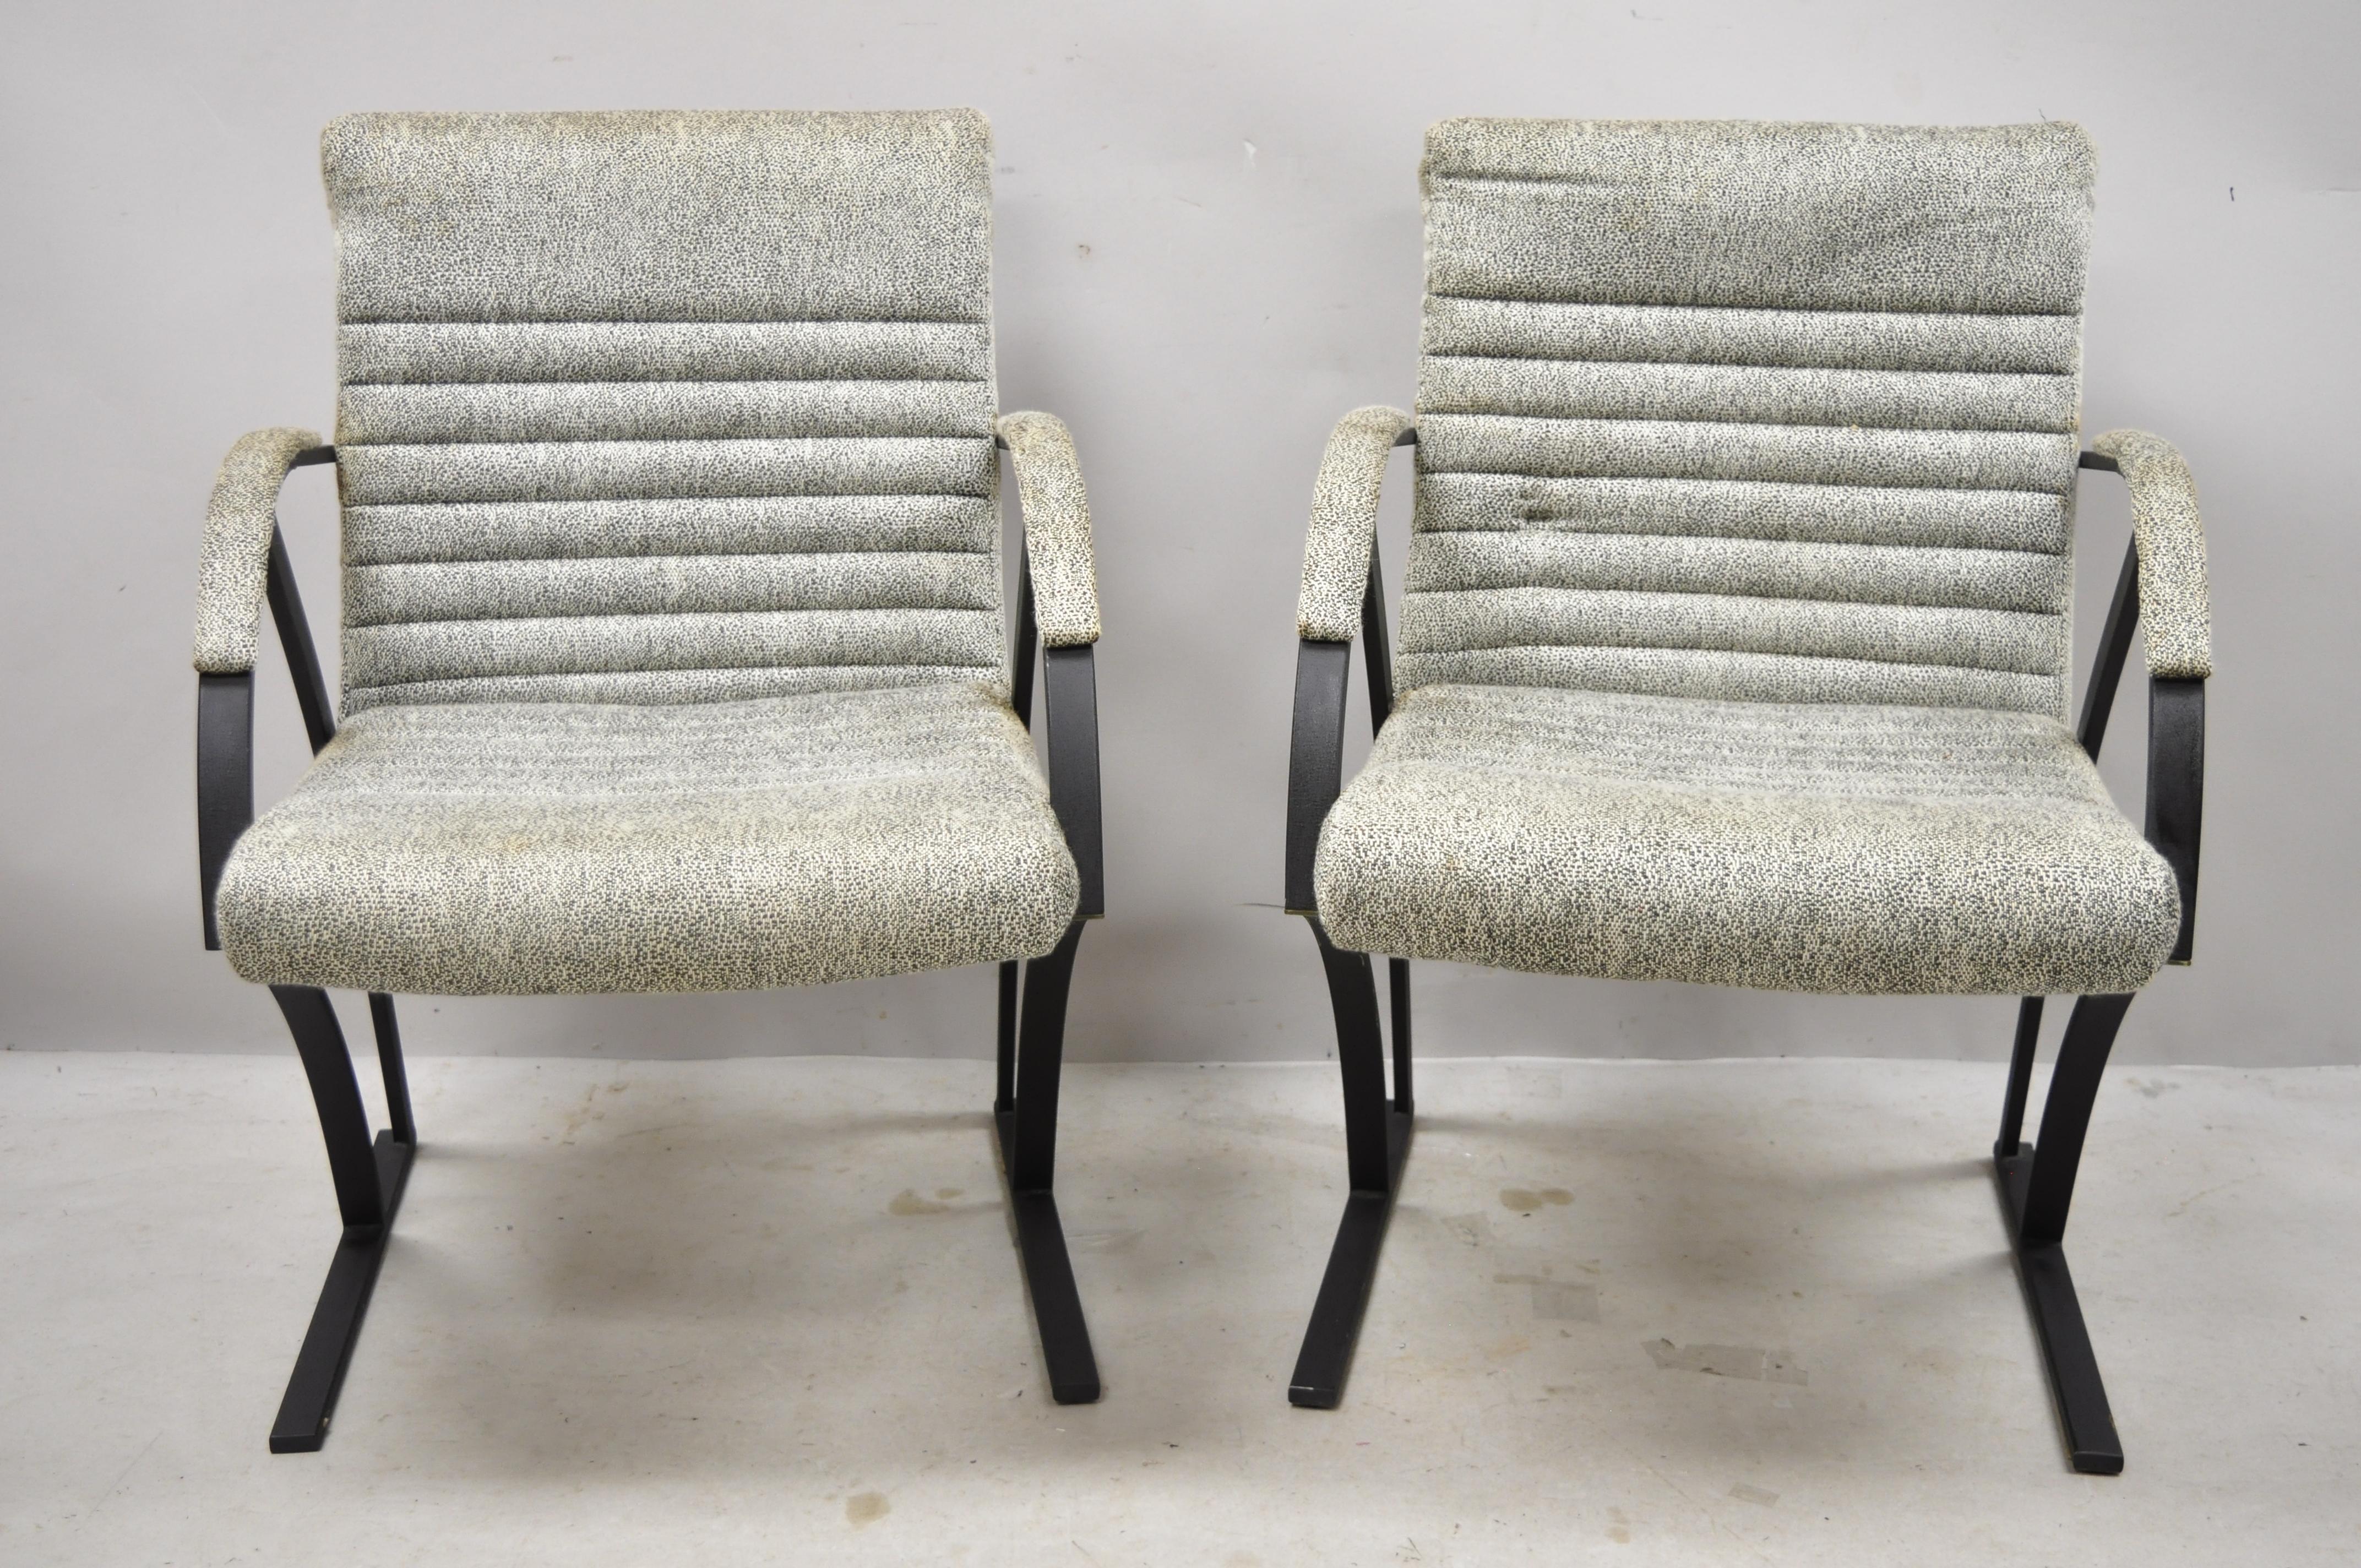 Midcentury Cal-Style furniture Art Deco metal frame lounge armchairs (A), a pair. Item features Chanel back and seats, upholstered armrests, original label, clean modernist lines, sleek sculptural form, circa mid to late 20th century.
Measurements: